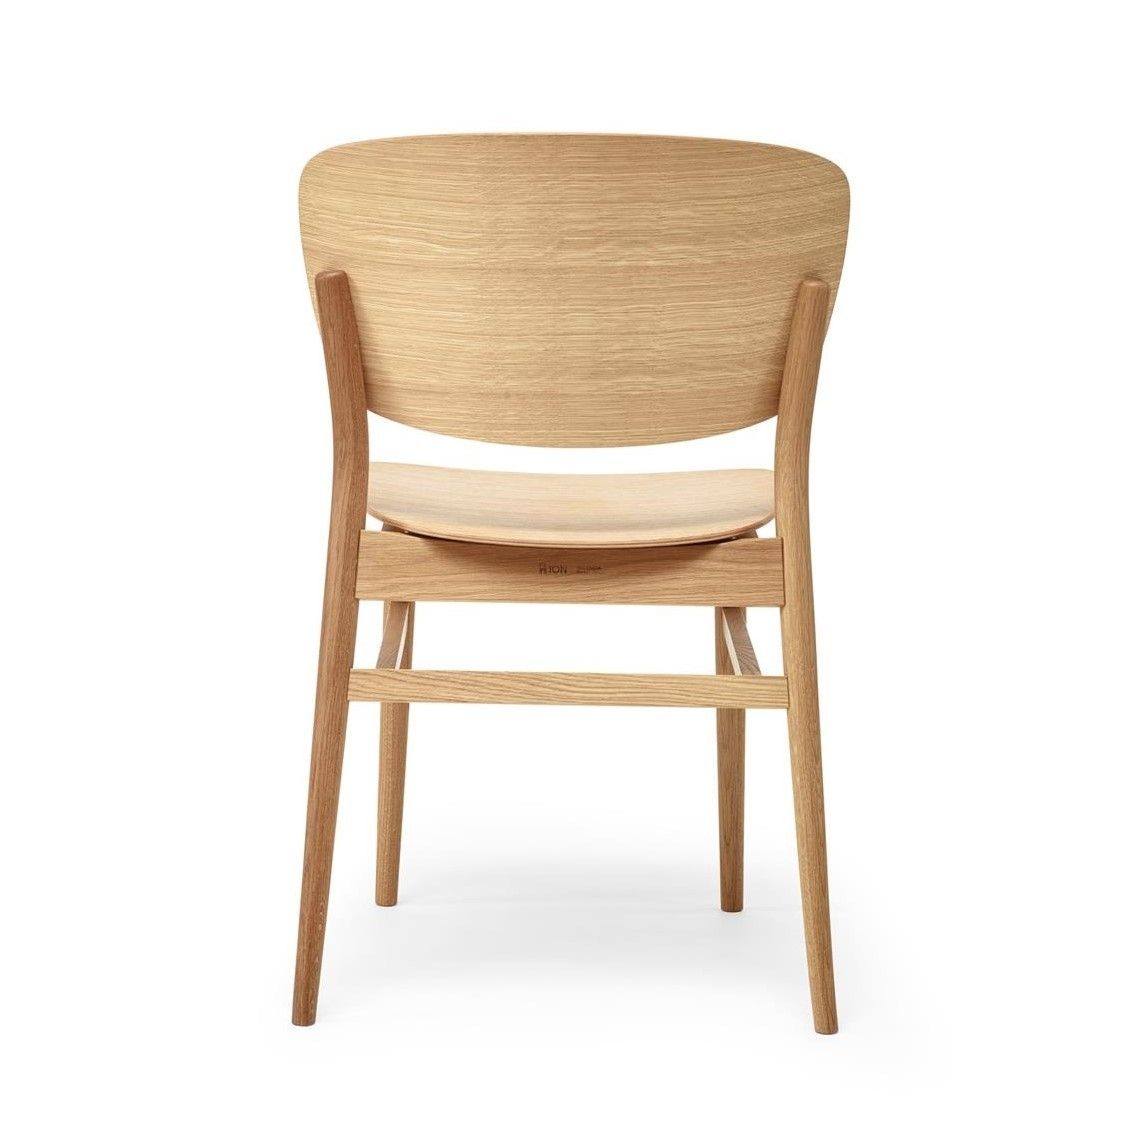 Widely Used Valencia Side Chairs Pertaining To Valencia Side Chair, Wooden – Telegraph Contract Furniture (View 18 of 20)